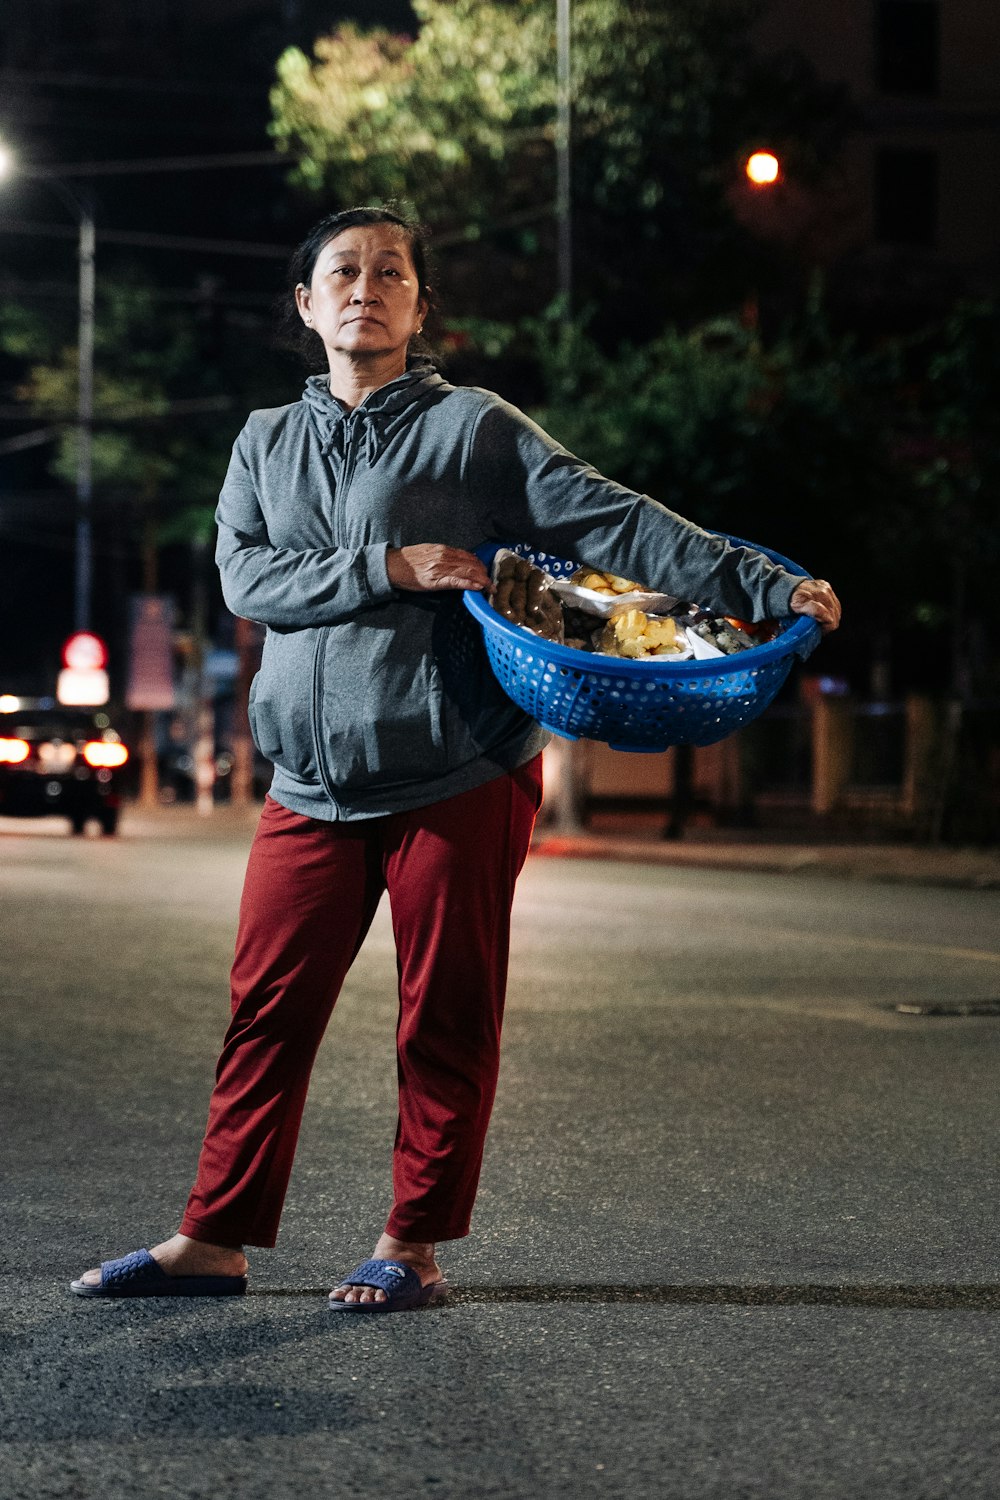 a man standing in the middle of a street holding a basket of food